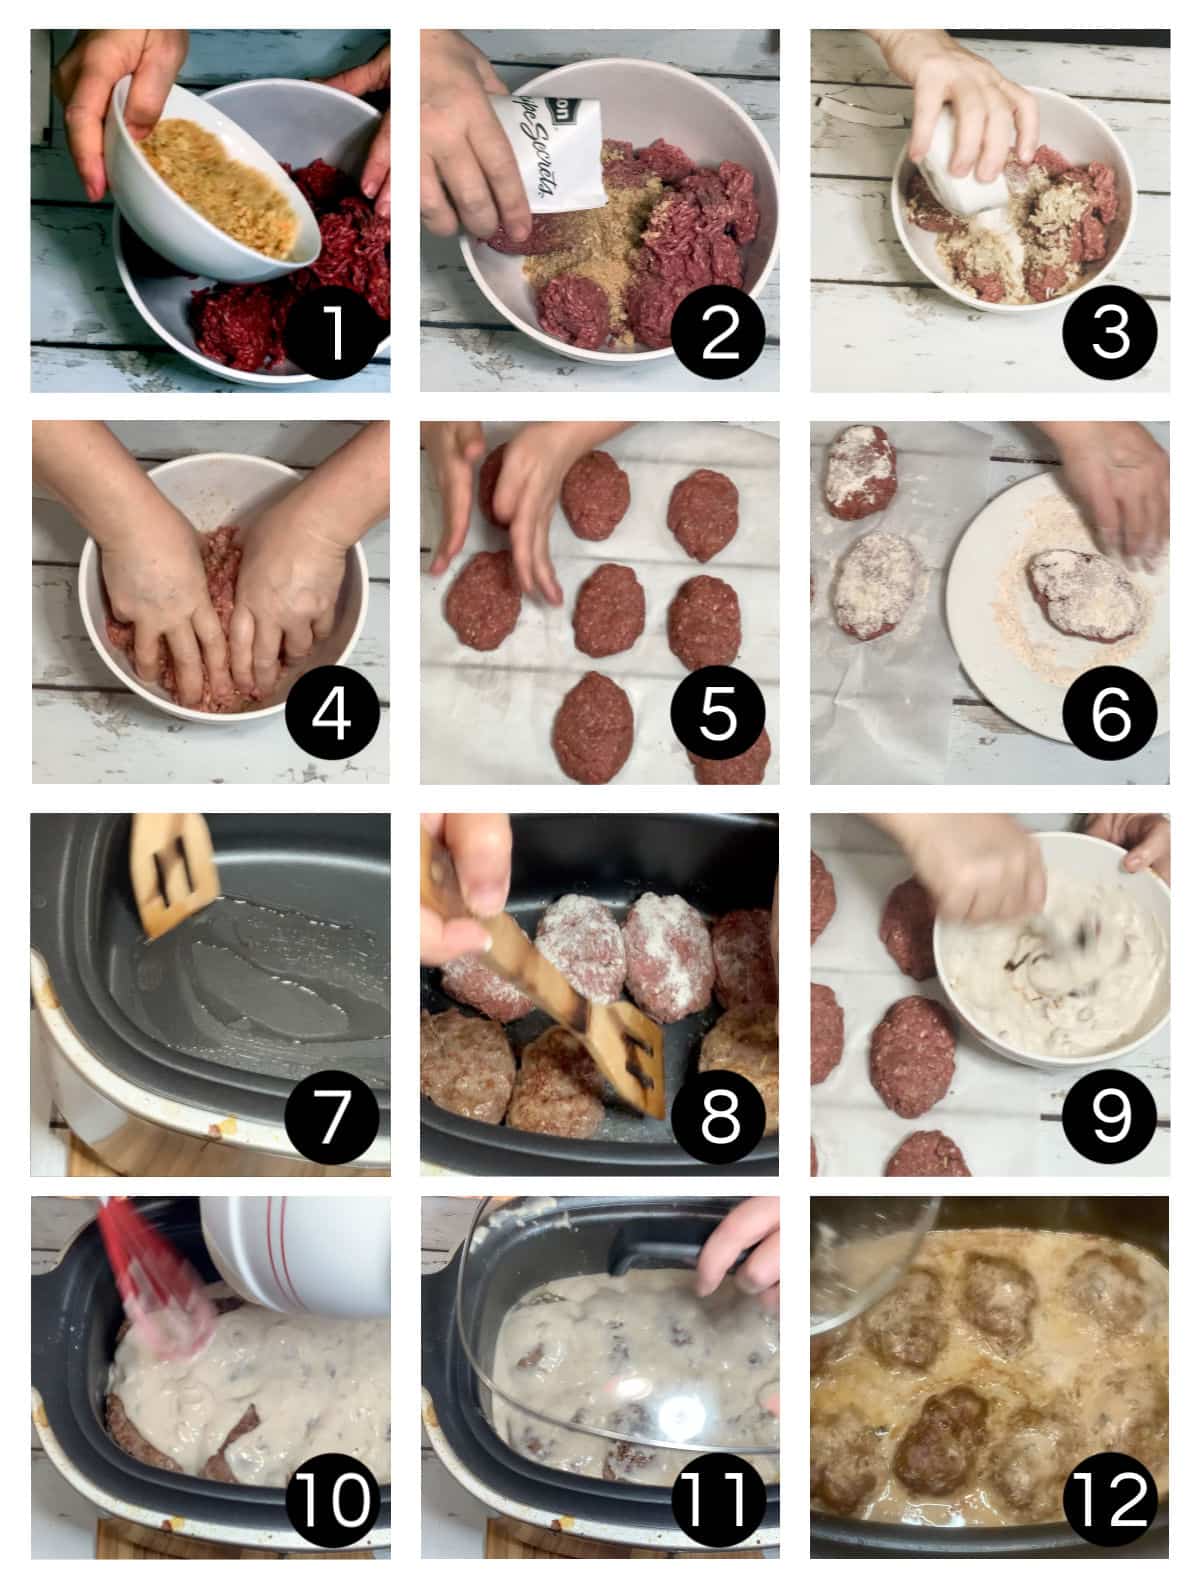 Step by step images for making salisbury steak.